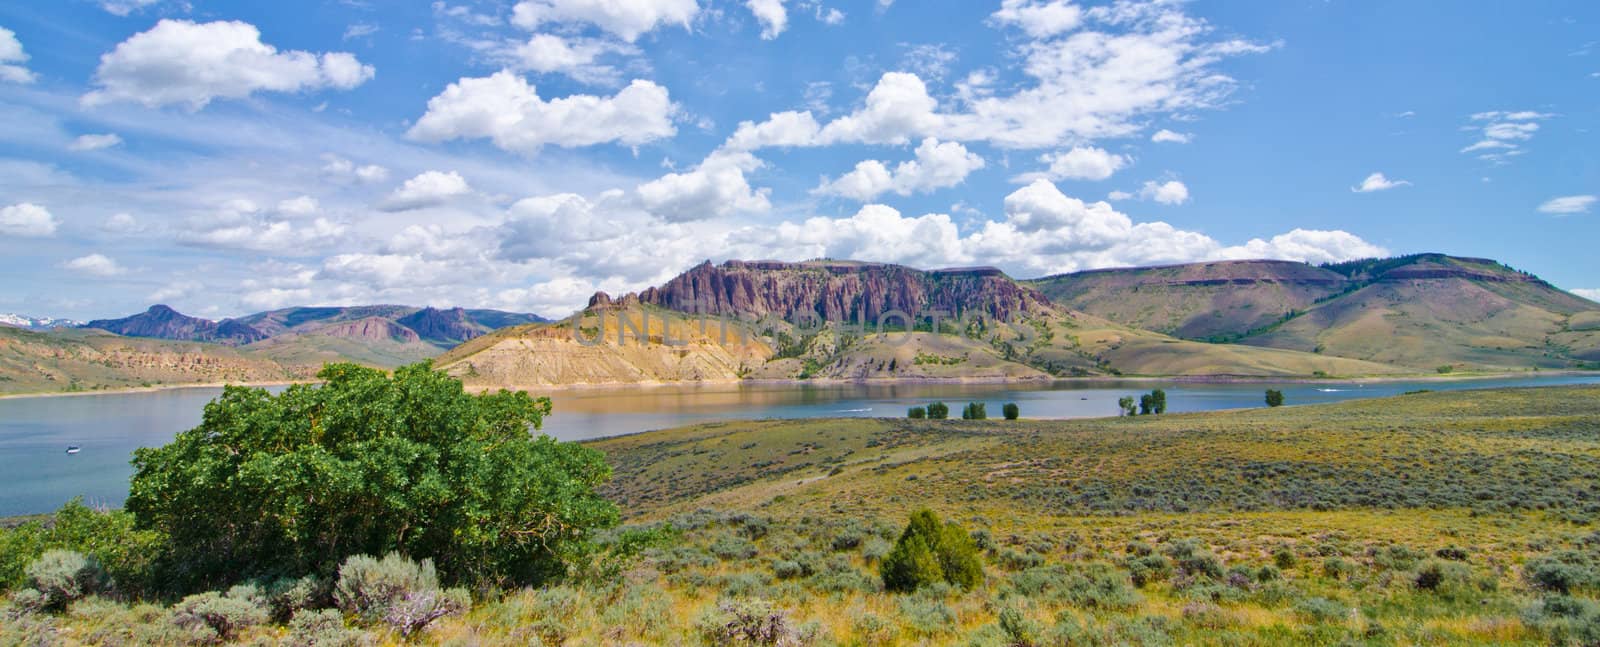 Blue Mesa Reservoir in the Curecanti National Recreation Area in Southern Colorado by robert.bohrer25@gmail.com